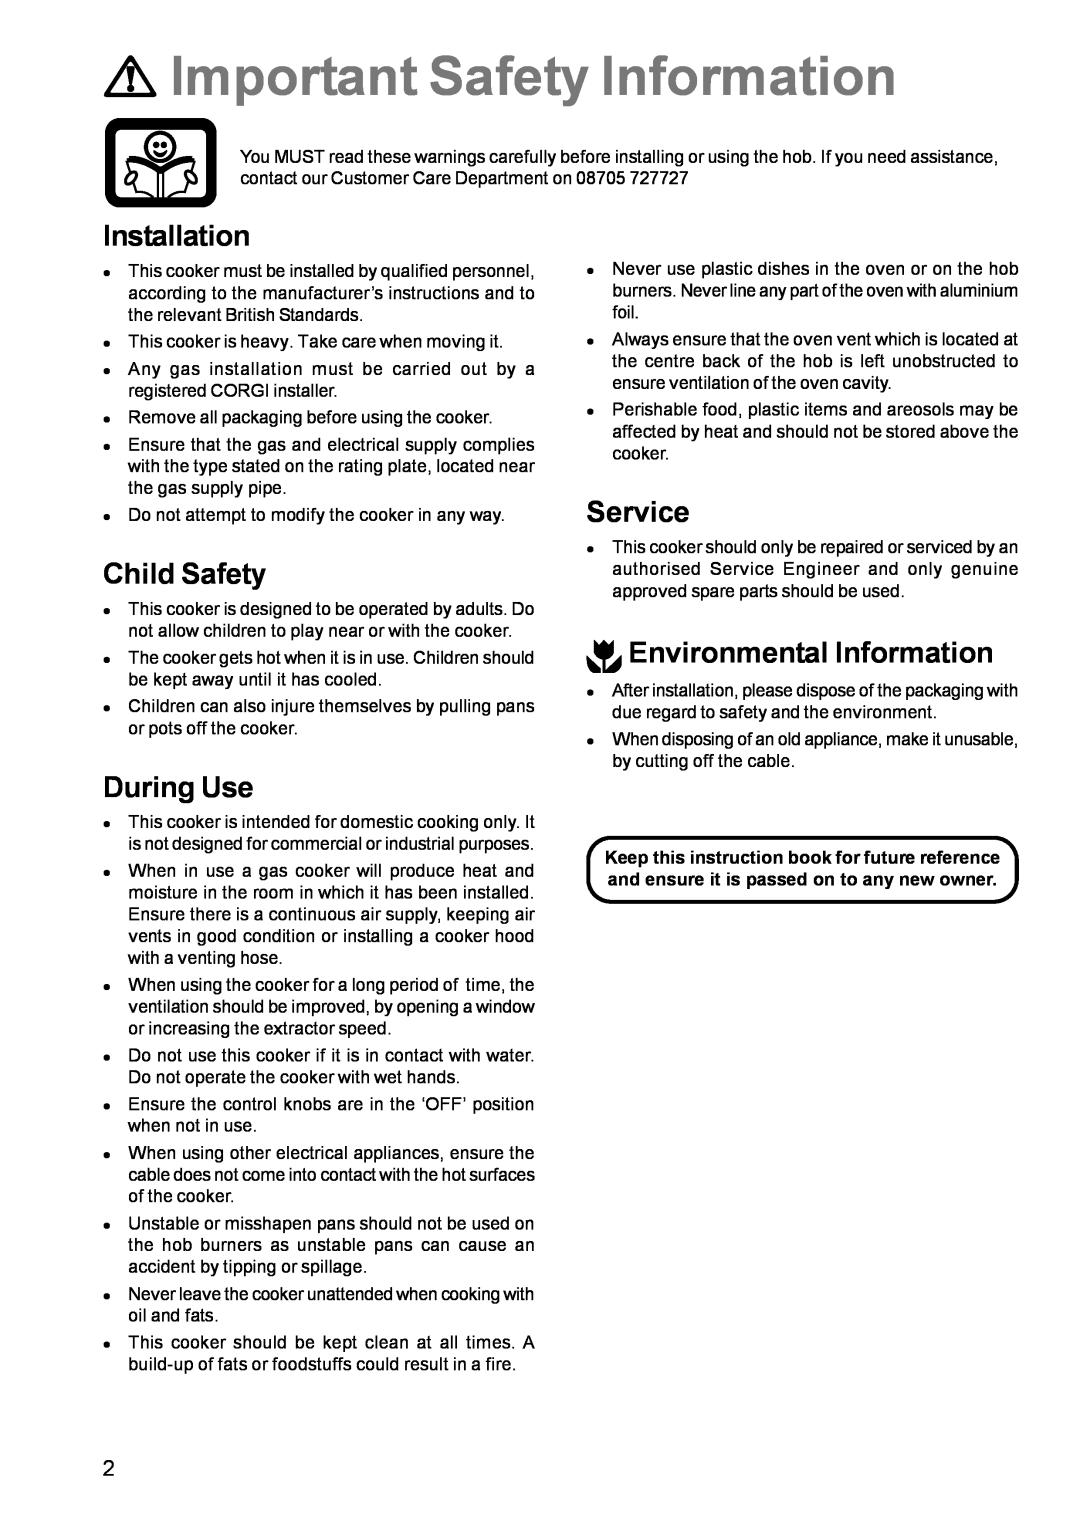 Zanussi ZCM 610 Important Safety Information, Installation, Child Safety, During Use, Service, Environmental Information 